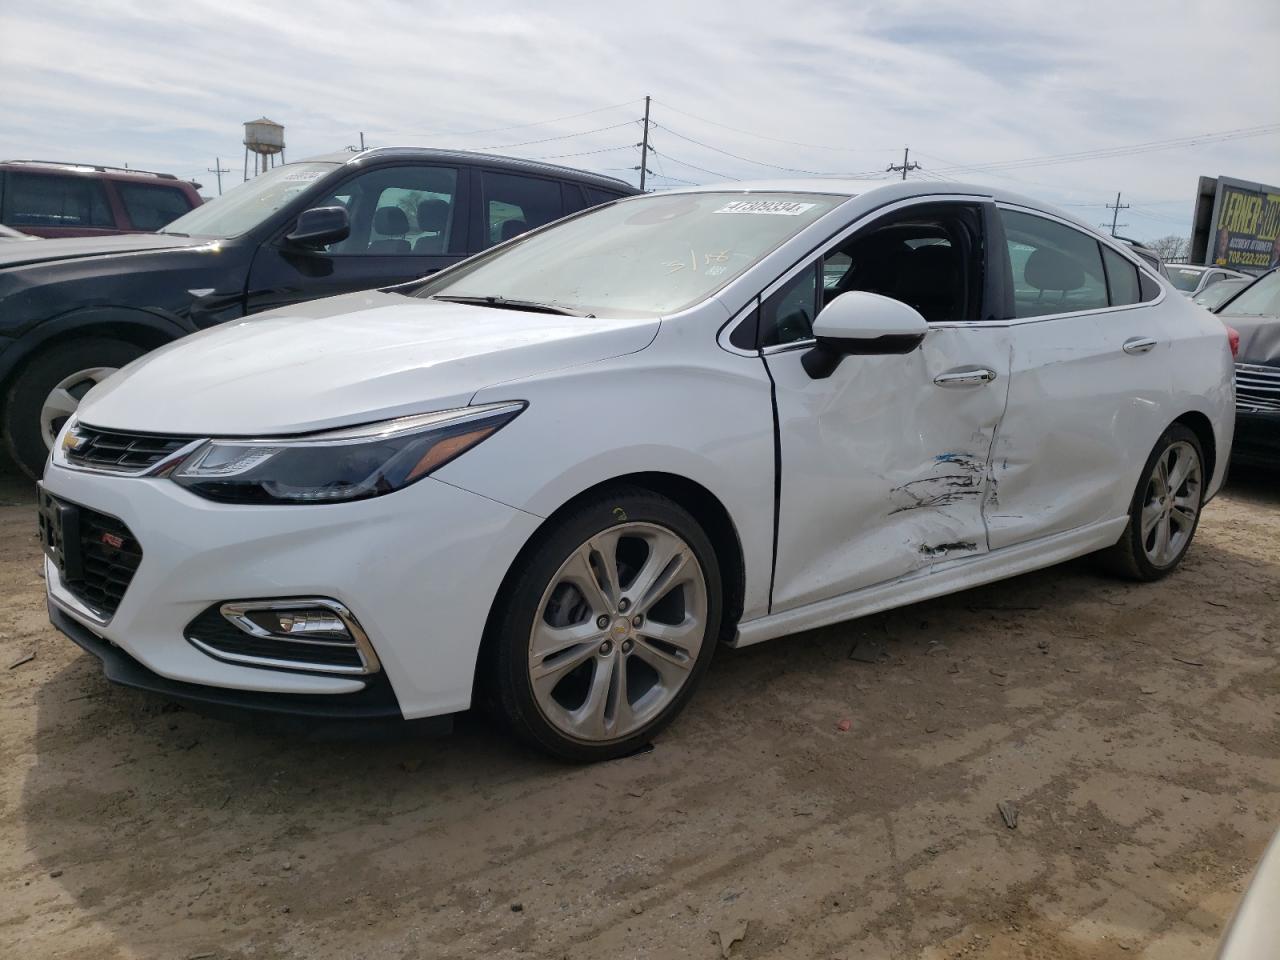 vin: 1G1BF5SM8H7251493 1G1BF5SM8H7251493 2017 chevrolet cruze 1400 for Sale in 60411 5546, Il - Chicago South, Chicago Heights, USA